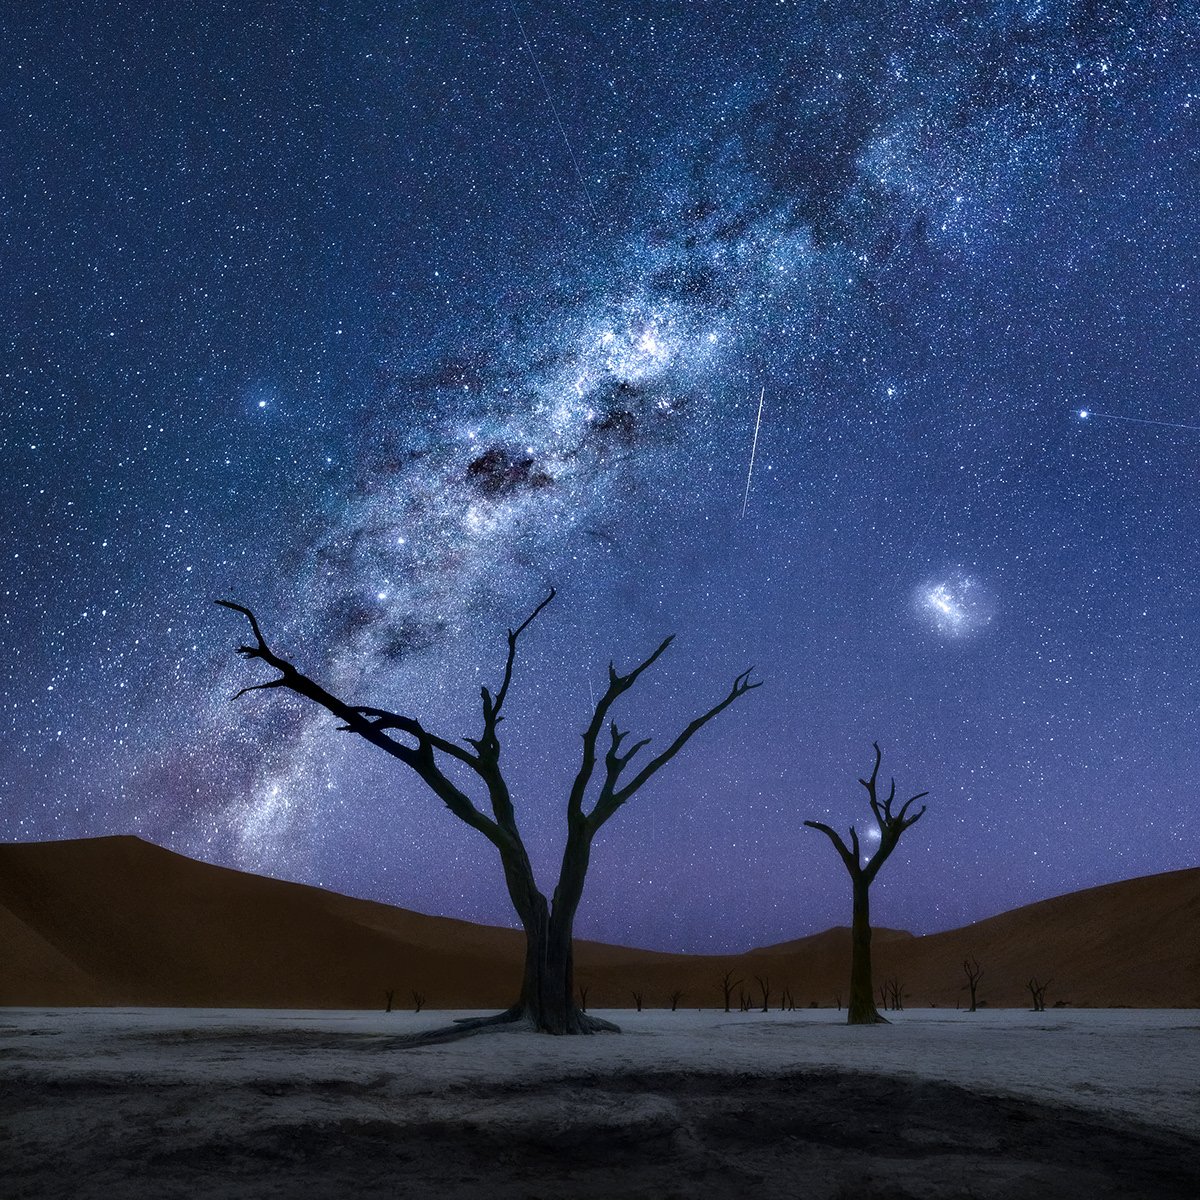 Isabella Tabacchi's Astrophotography Under Namibia’s Surreal Night Sky